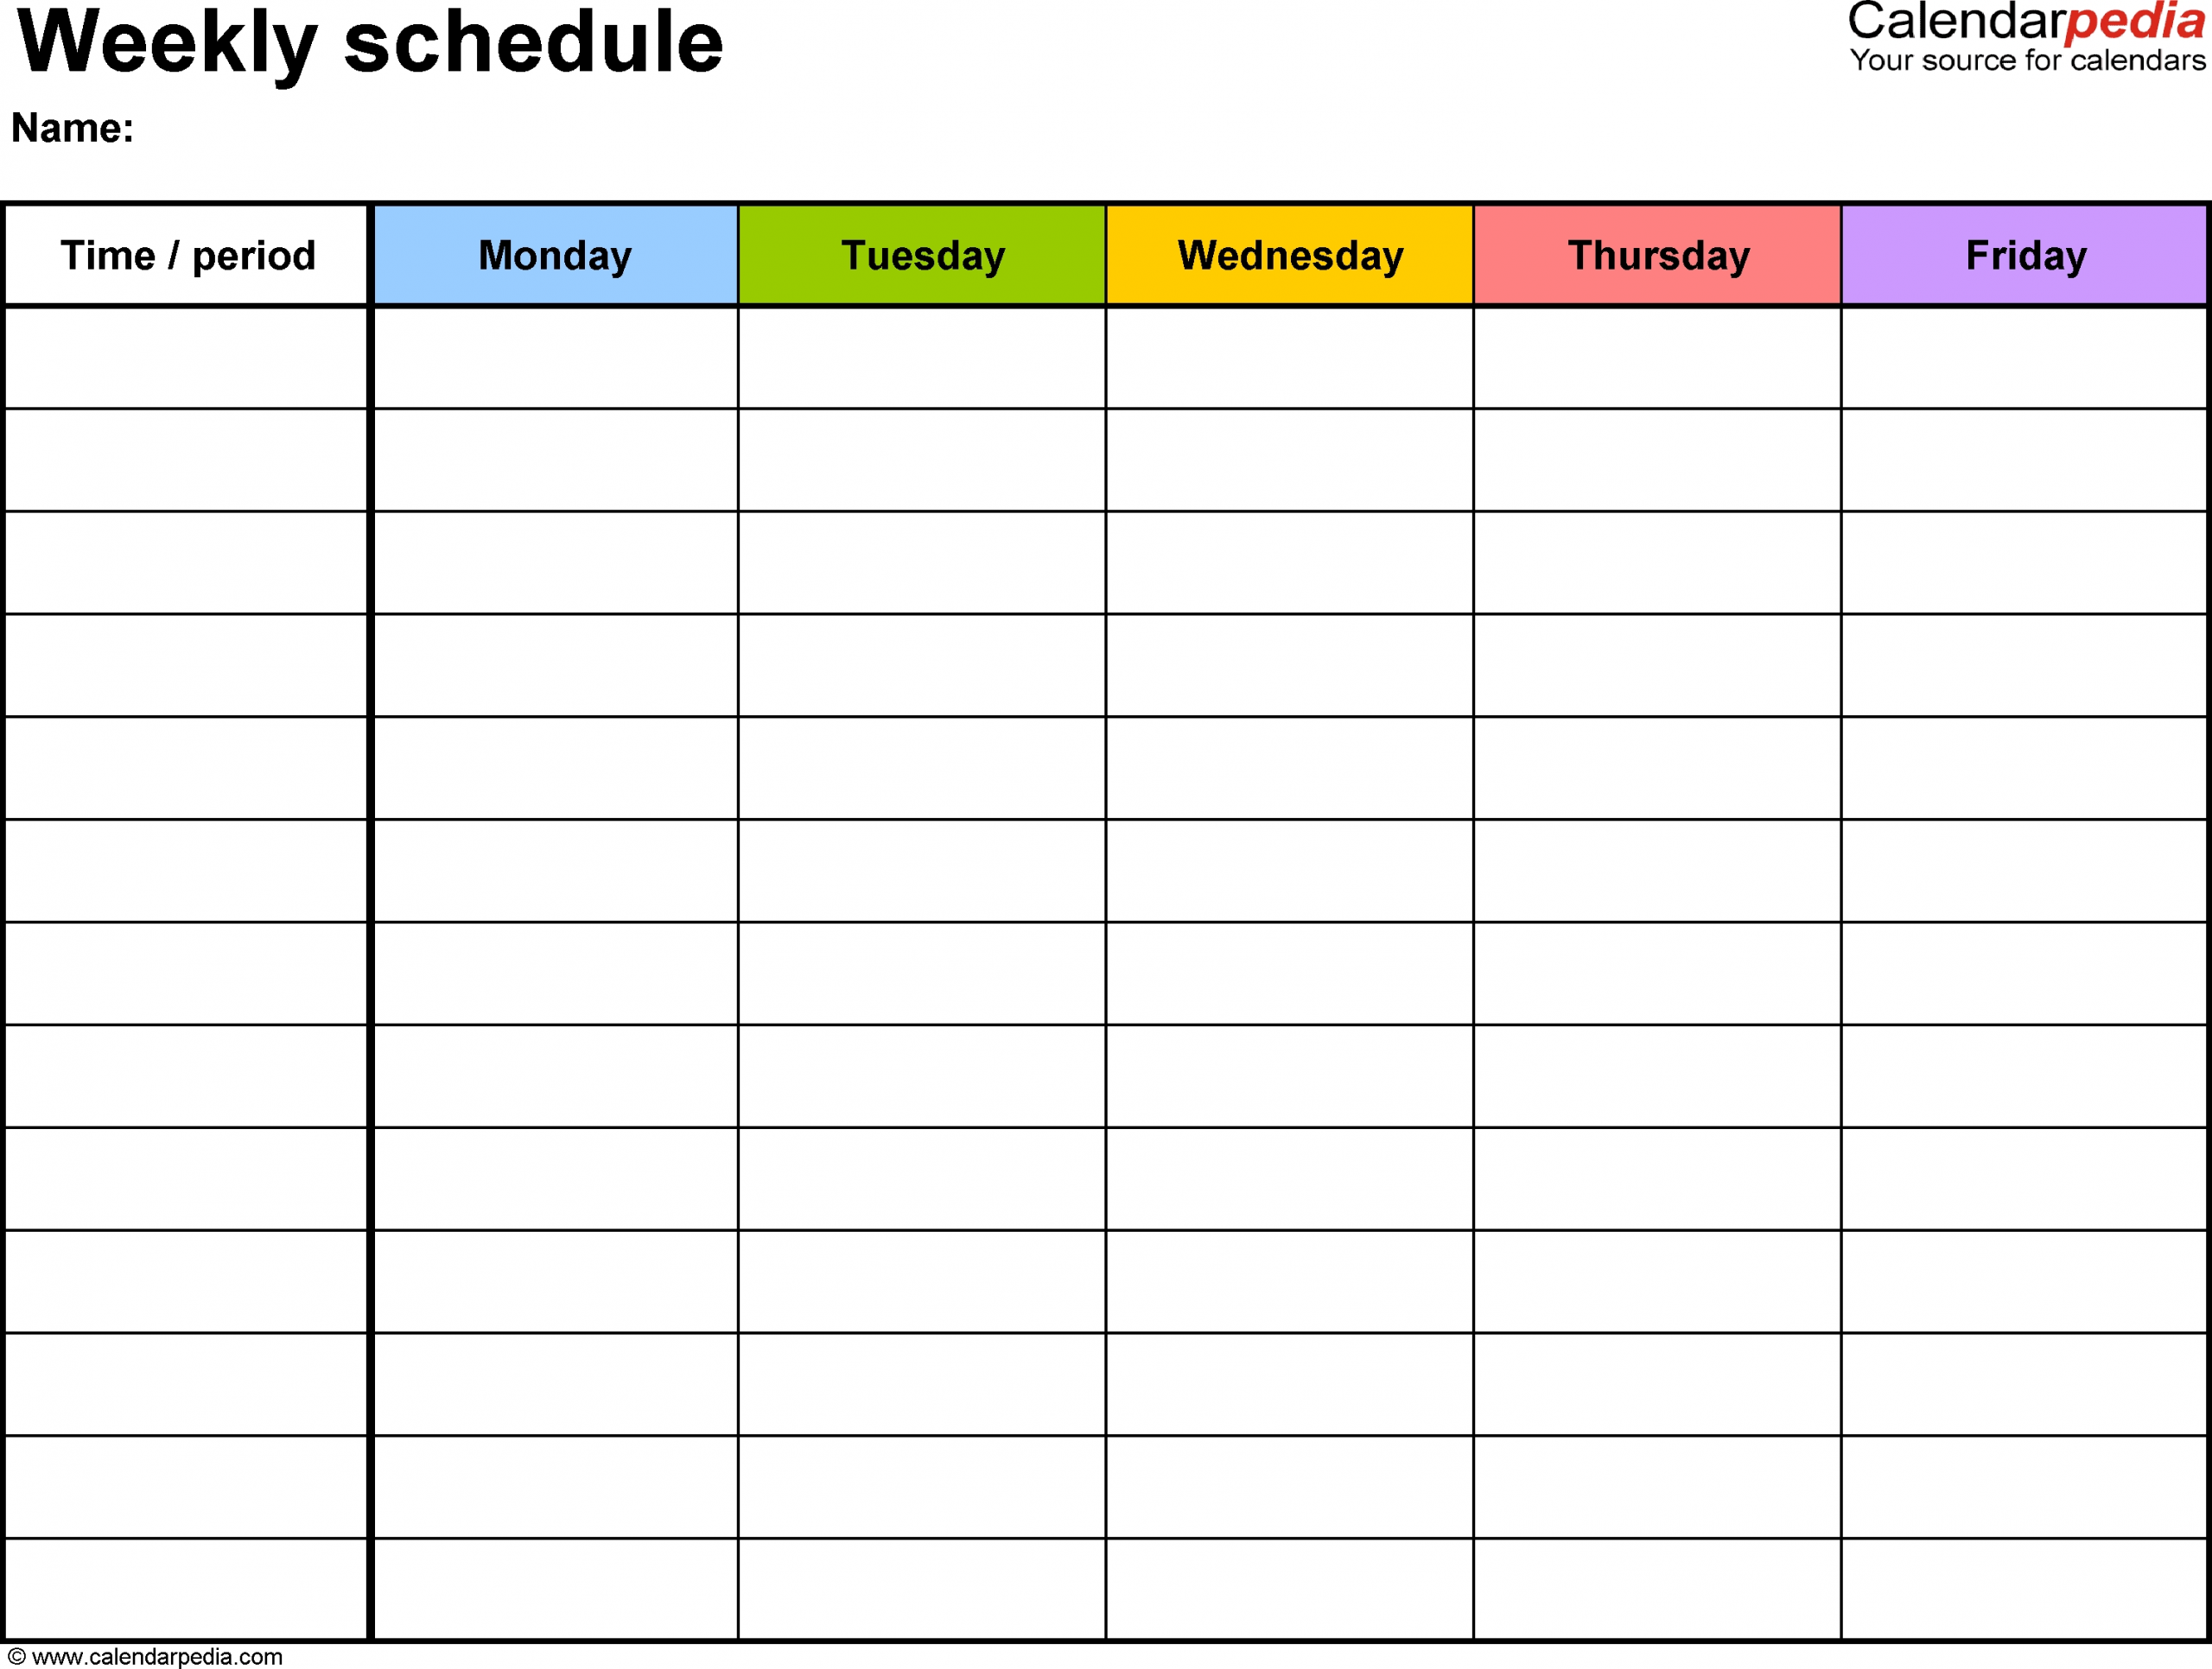 Free Weekly Schedule Templates For Word - 18 Templates for Weekly Schedule Template Free To Print